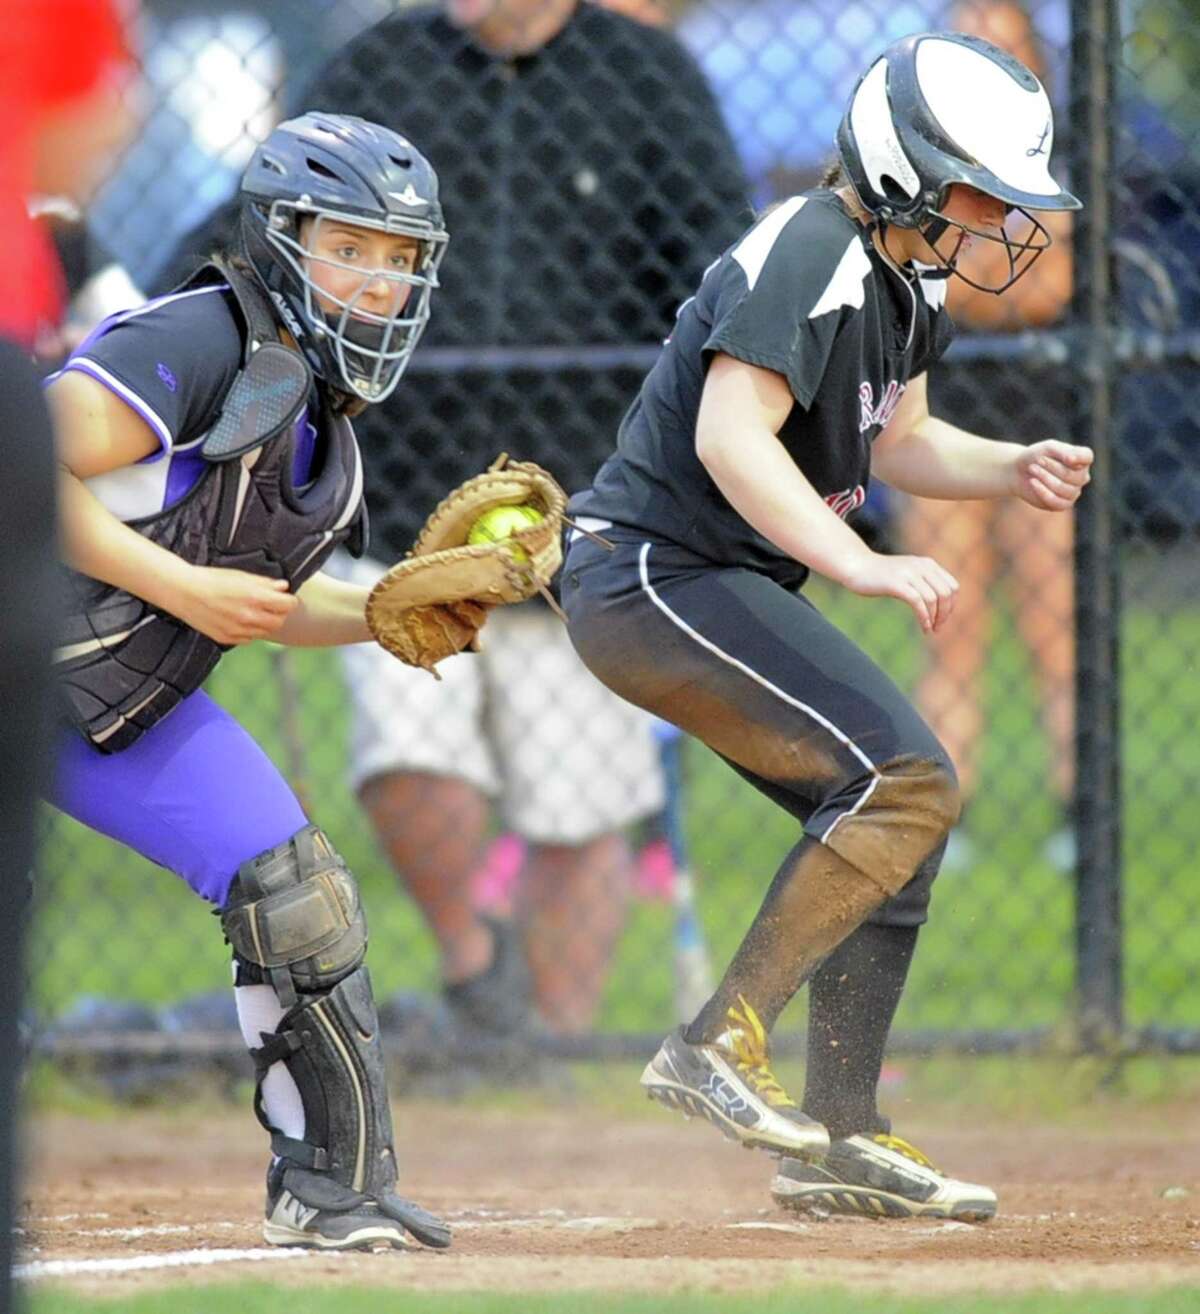 New Canaan Rachel Keshin slides past the tag of Westhill Jordan Benzaken in a varsity girls softball game at Waveny Park in New Canaan on May 16, 2017. Westhill won 3-2.